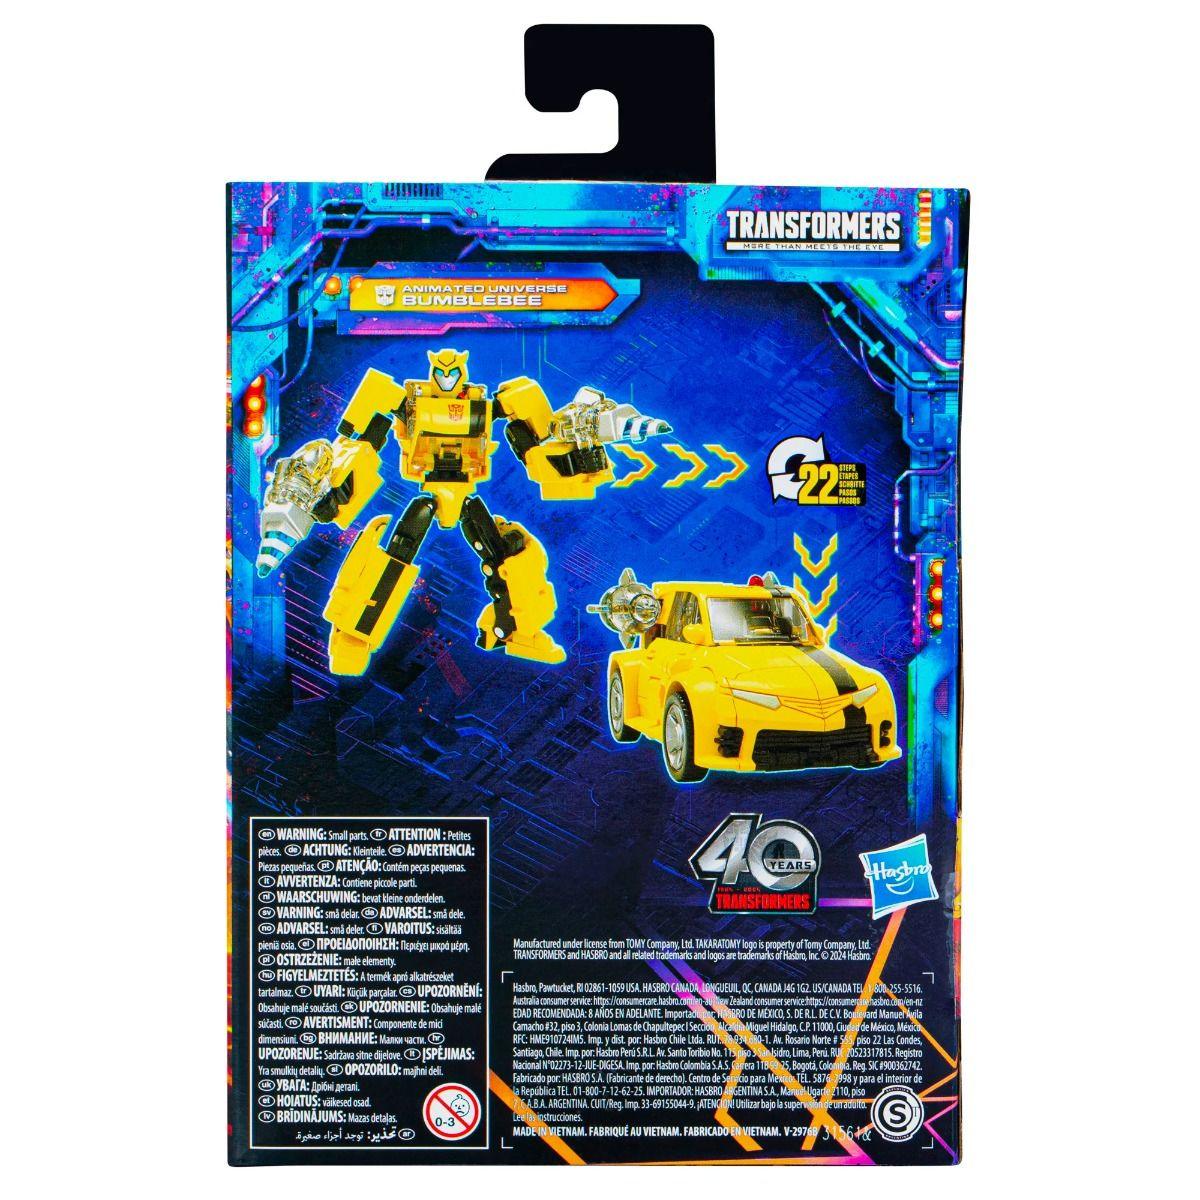 26056 Transformers Legacy United: Deluxe Class - Animated Universe Bumblebee - Hasbro - Titan Pop Culture